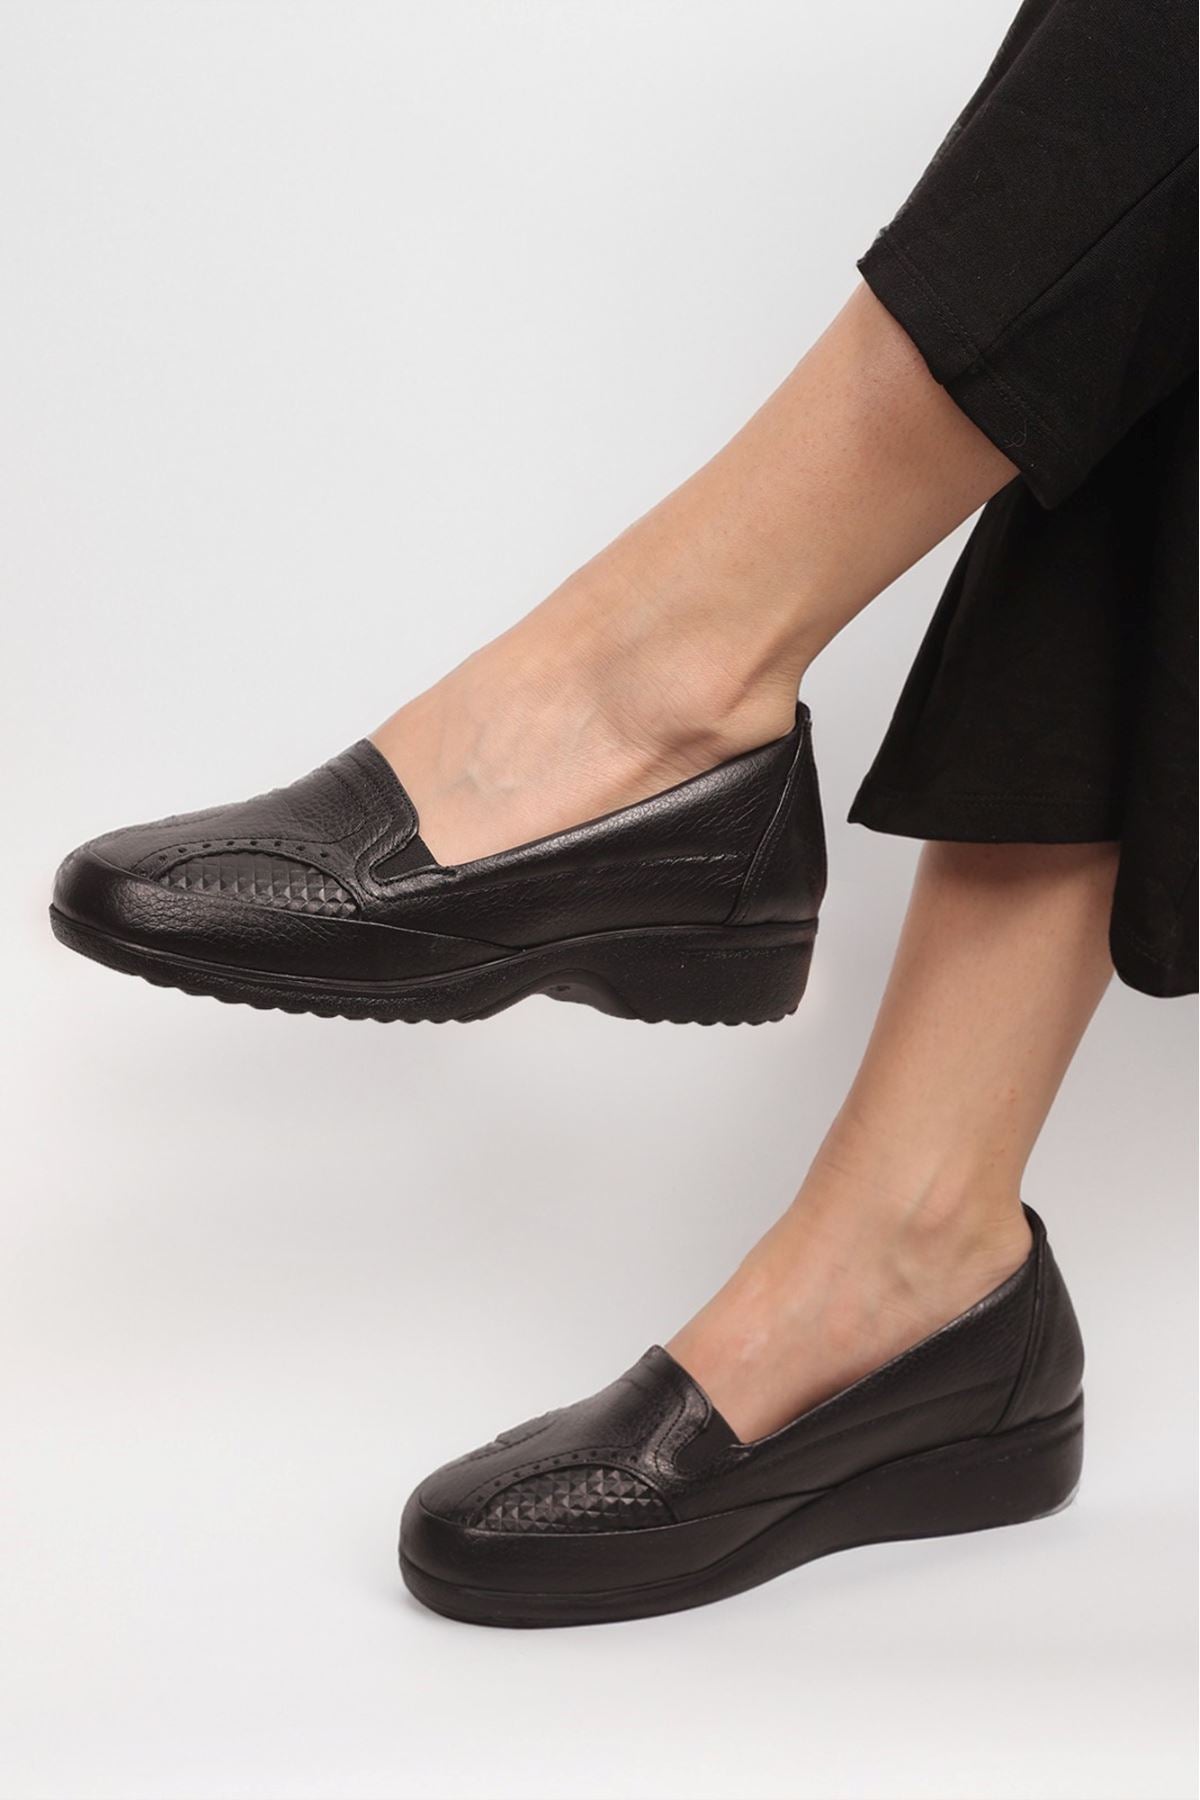 Women's Genuine Leather Non-Slip Soft Sole shoes - STREETMODE™